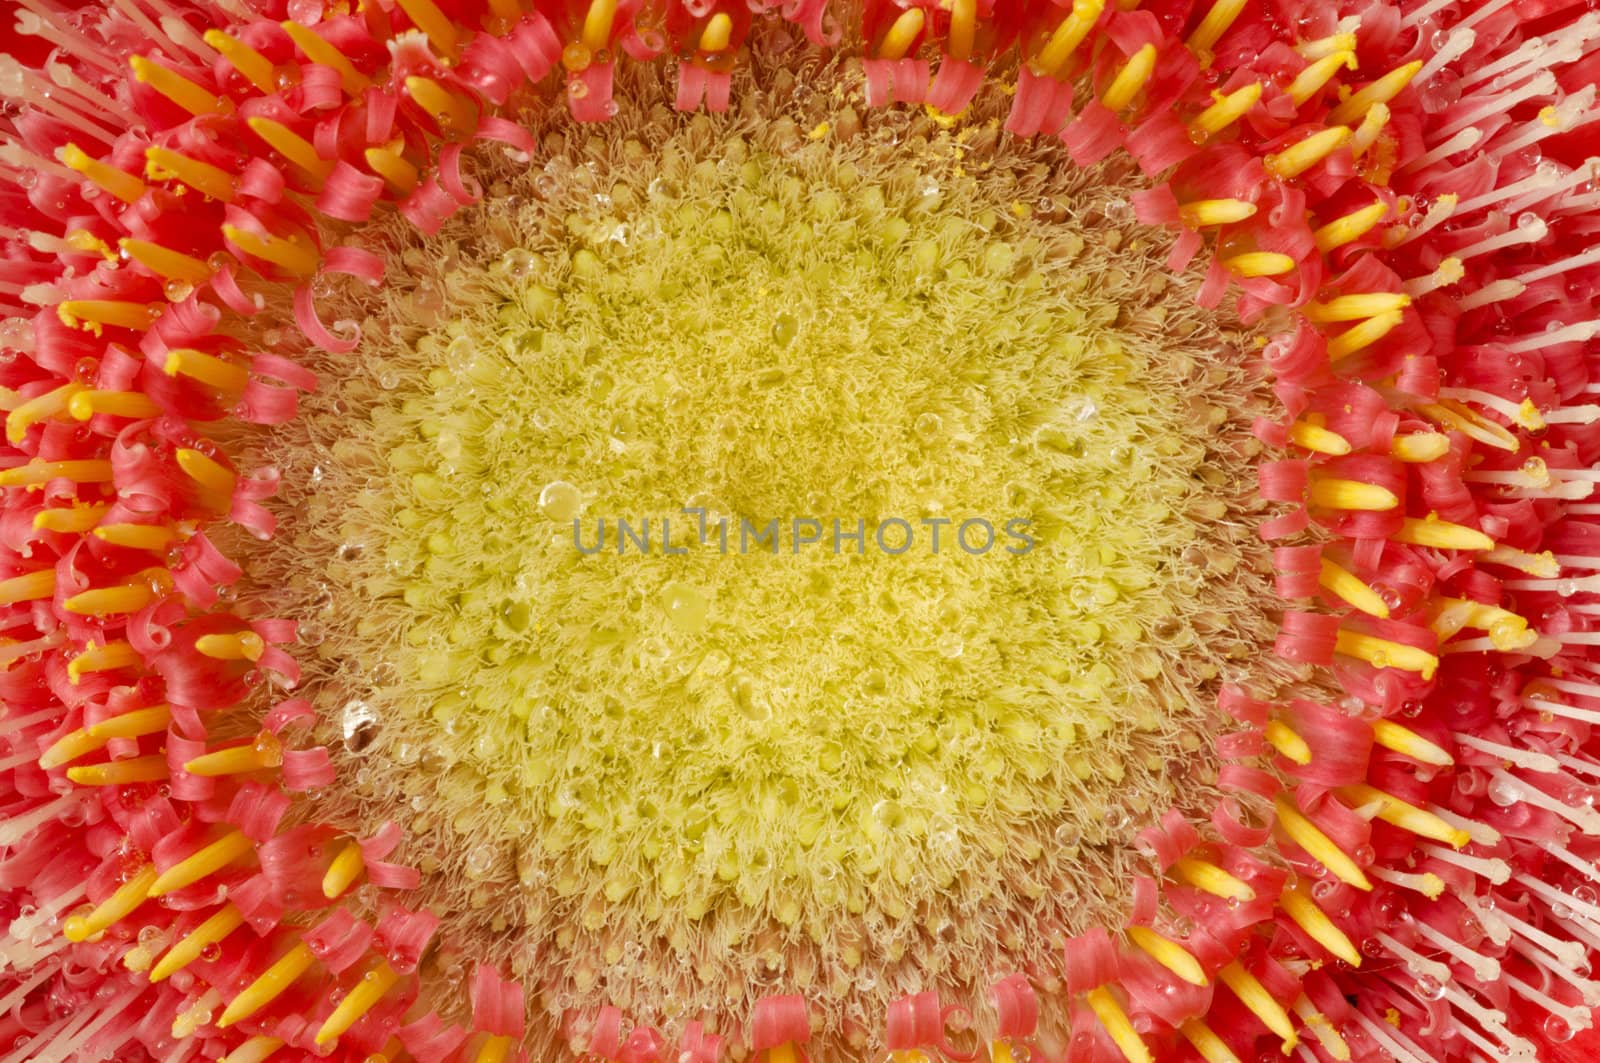 Macro image of the center portion of a Gerber Daisy